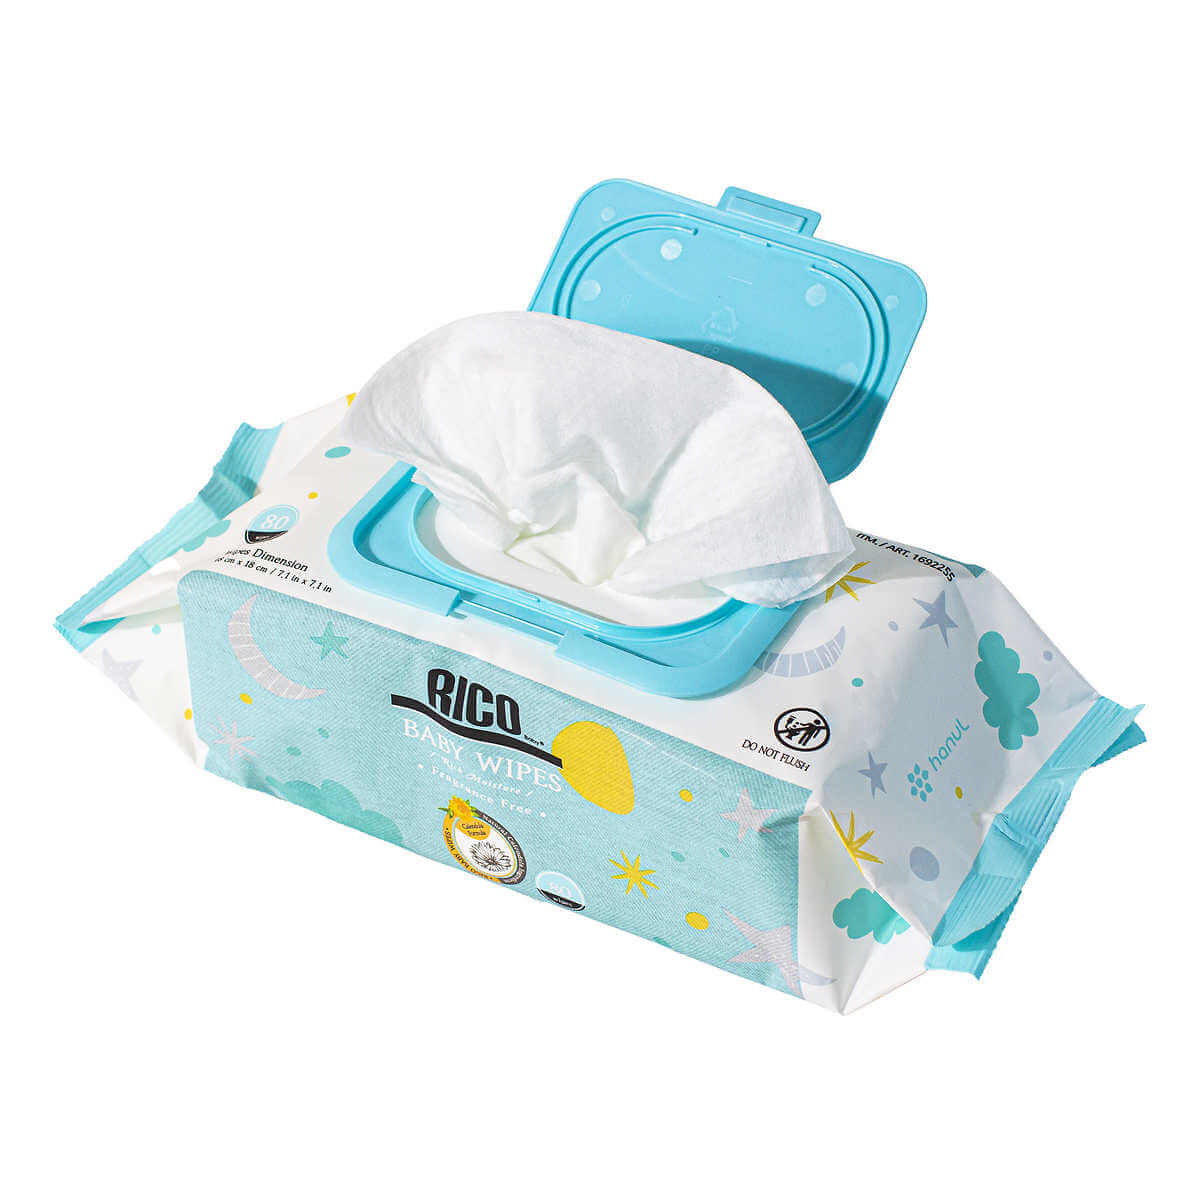 rico-baby-wipes-720-count_3